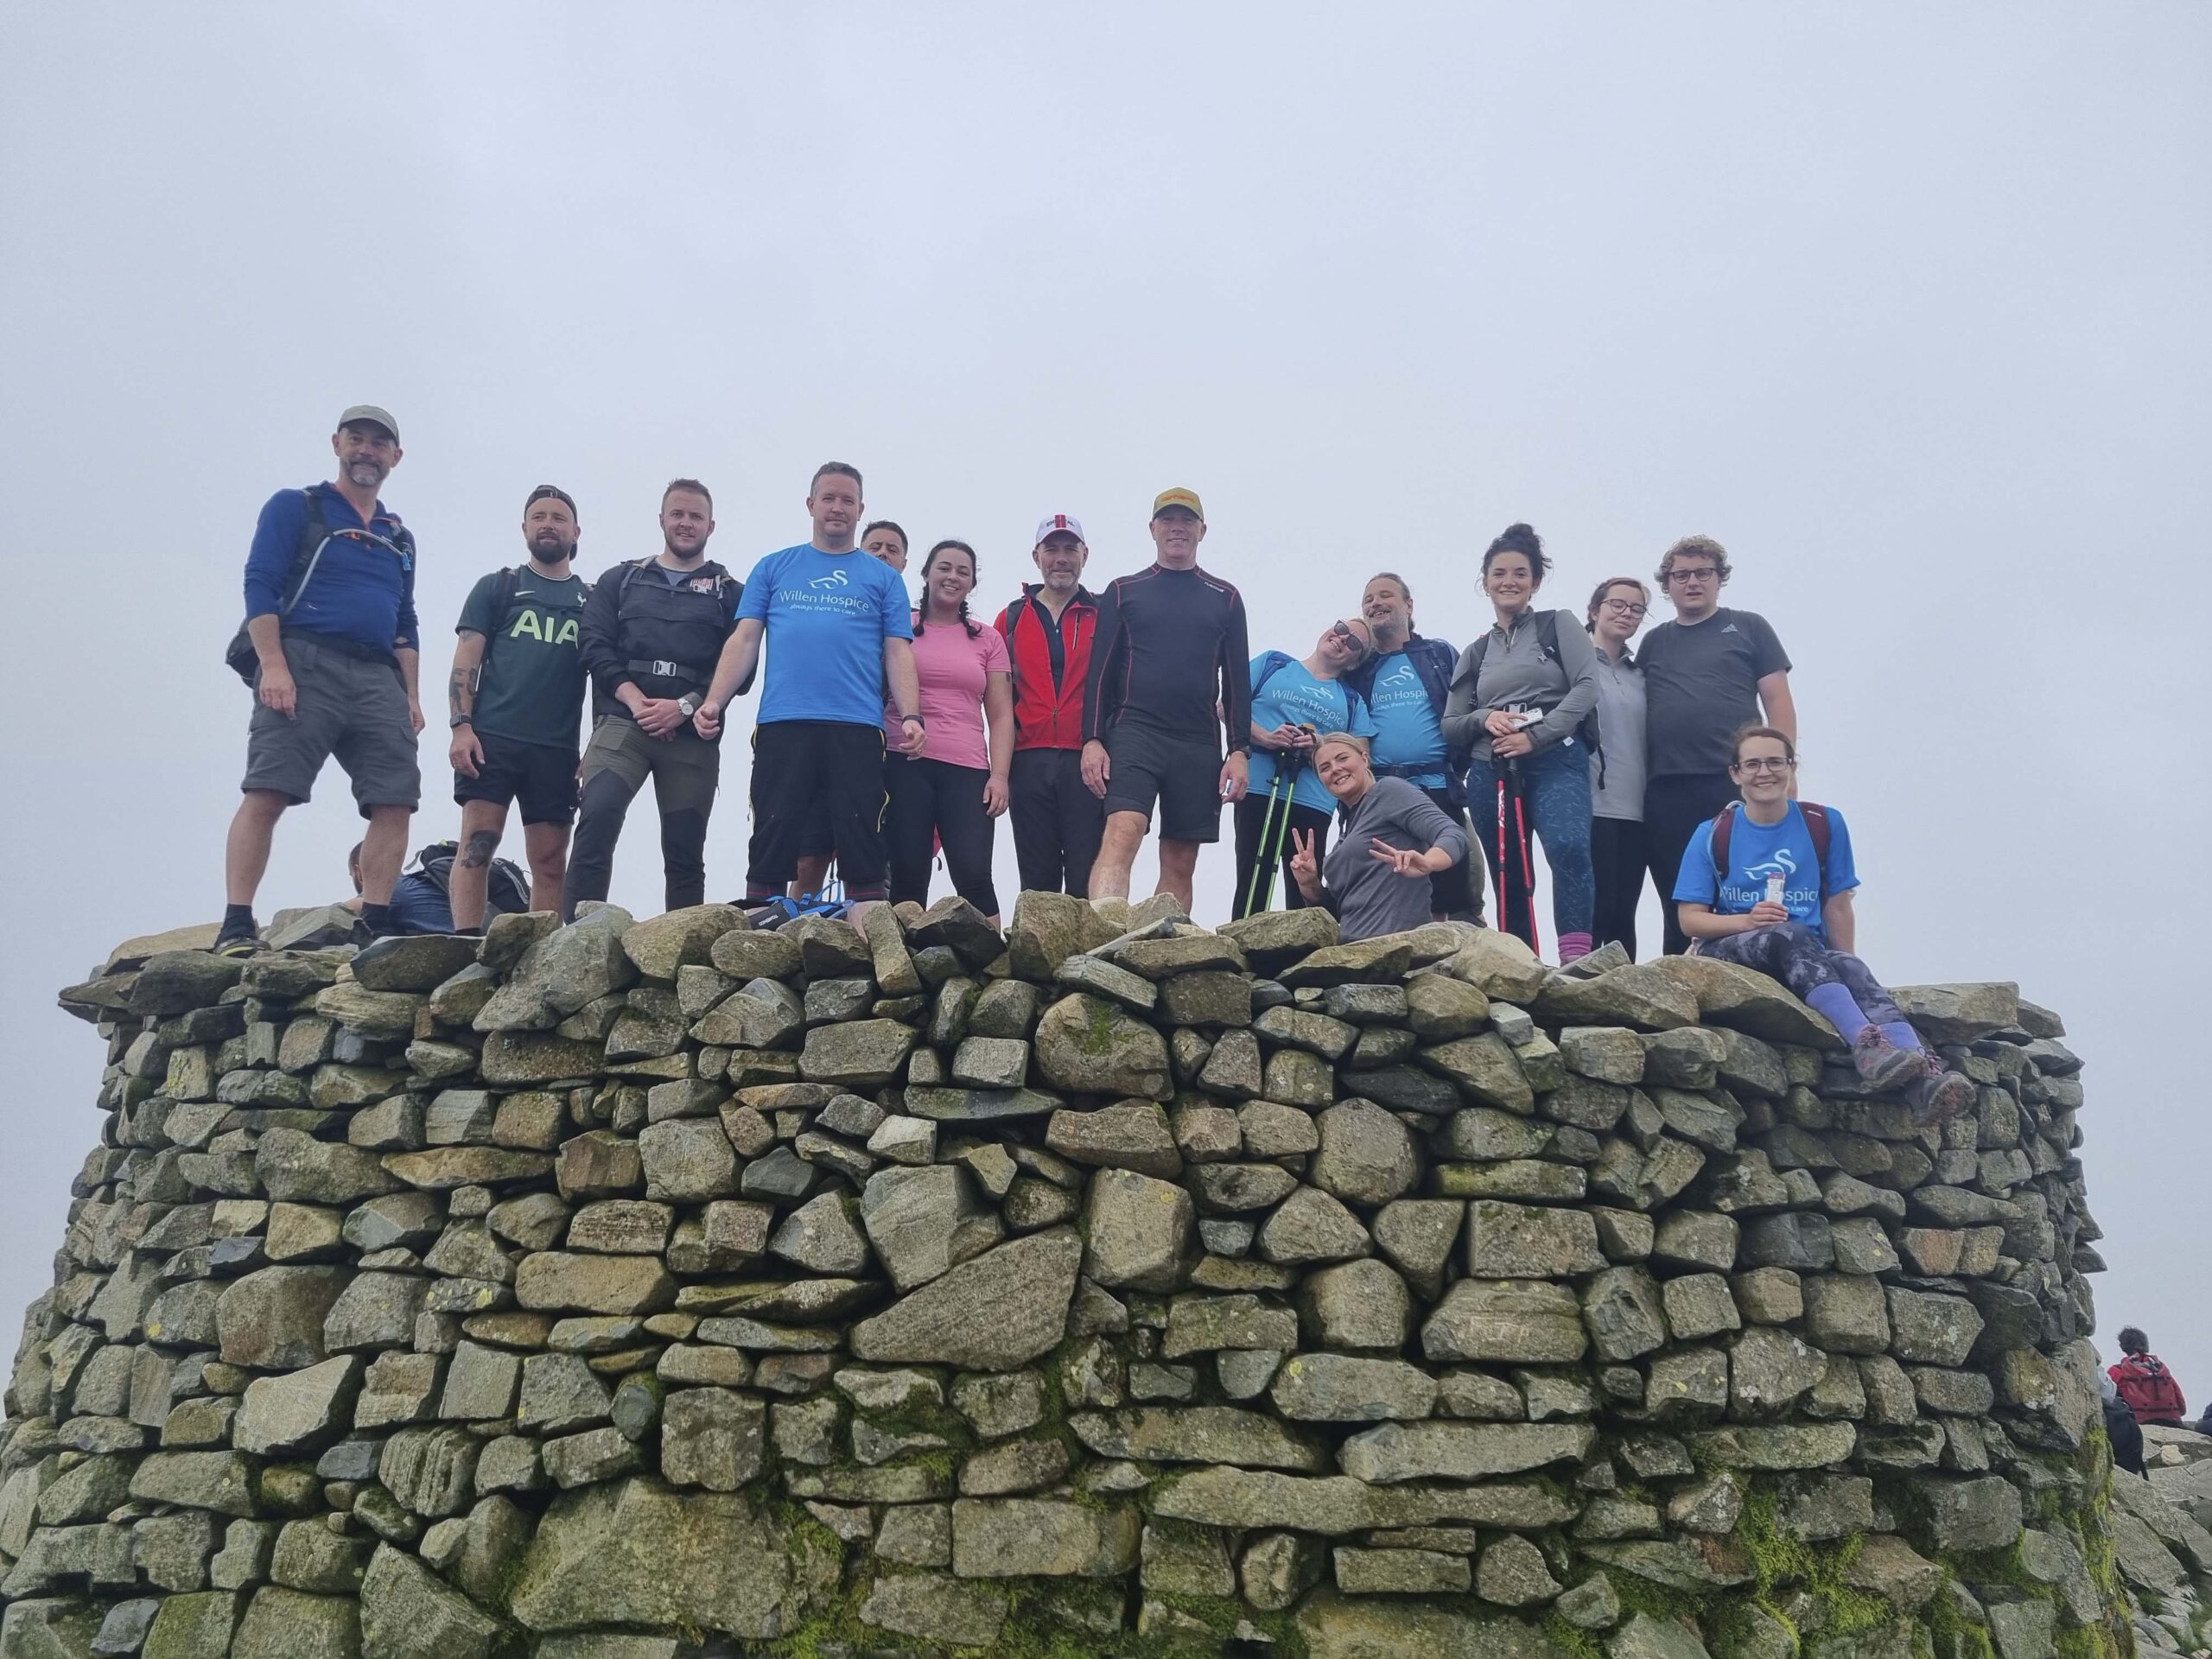 Team at Scafell Pike